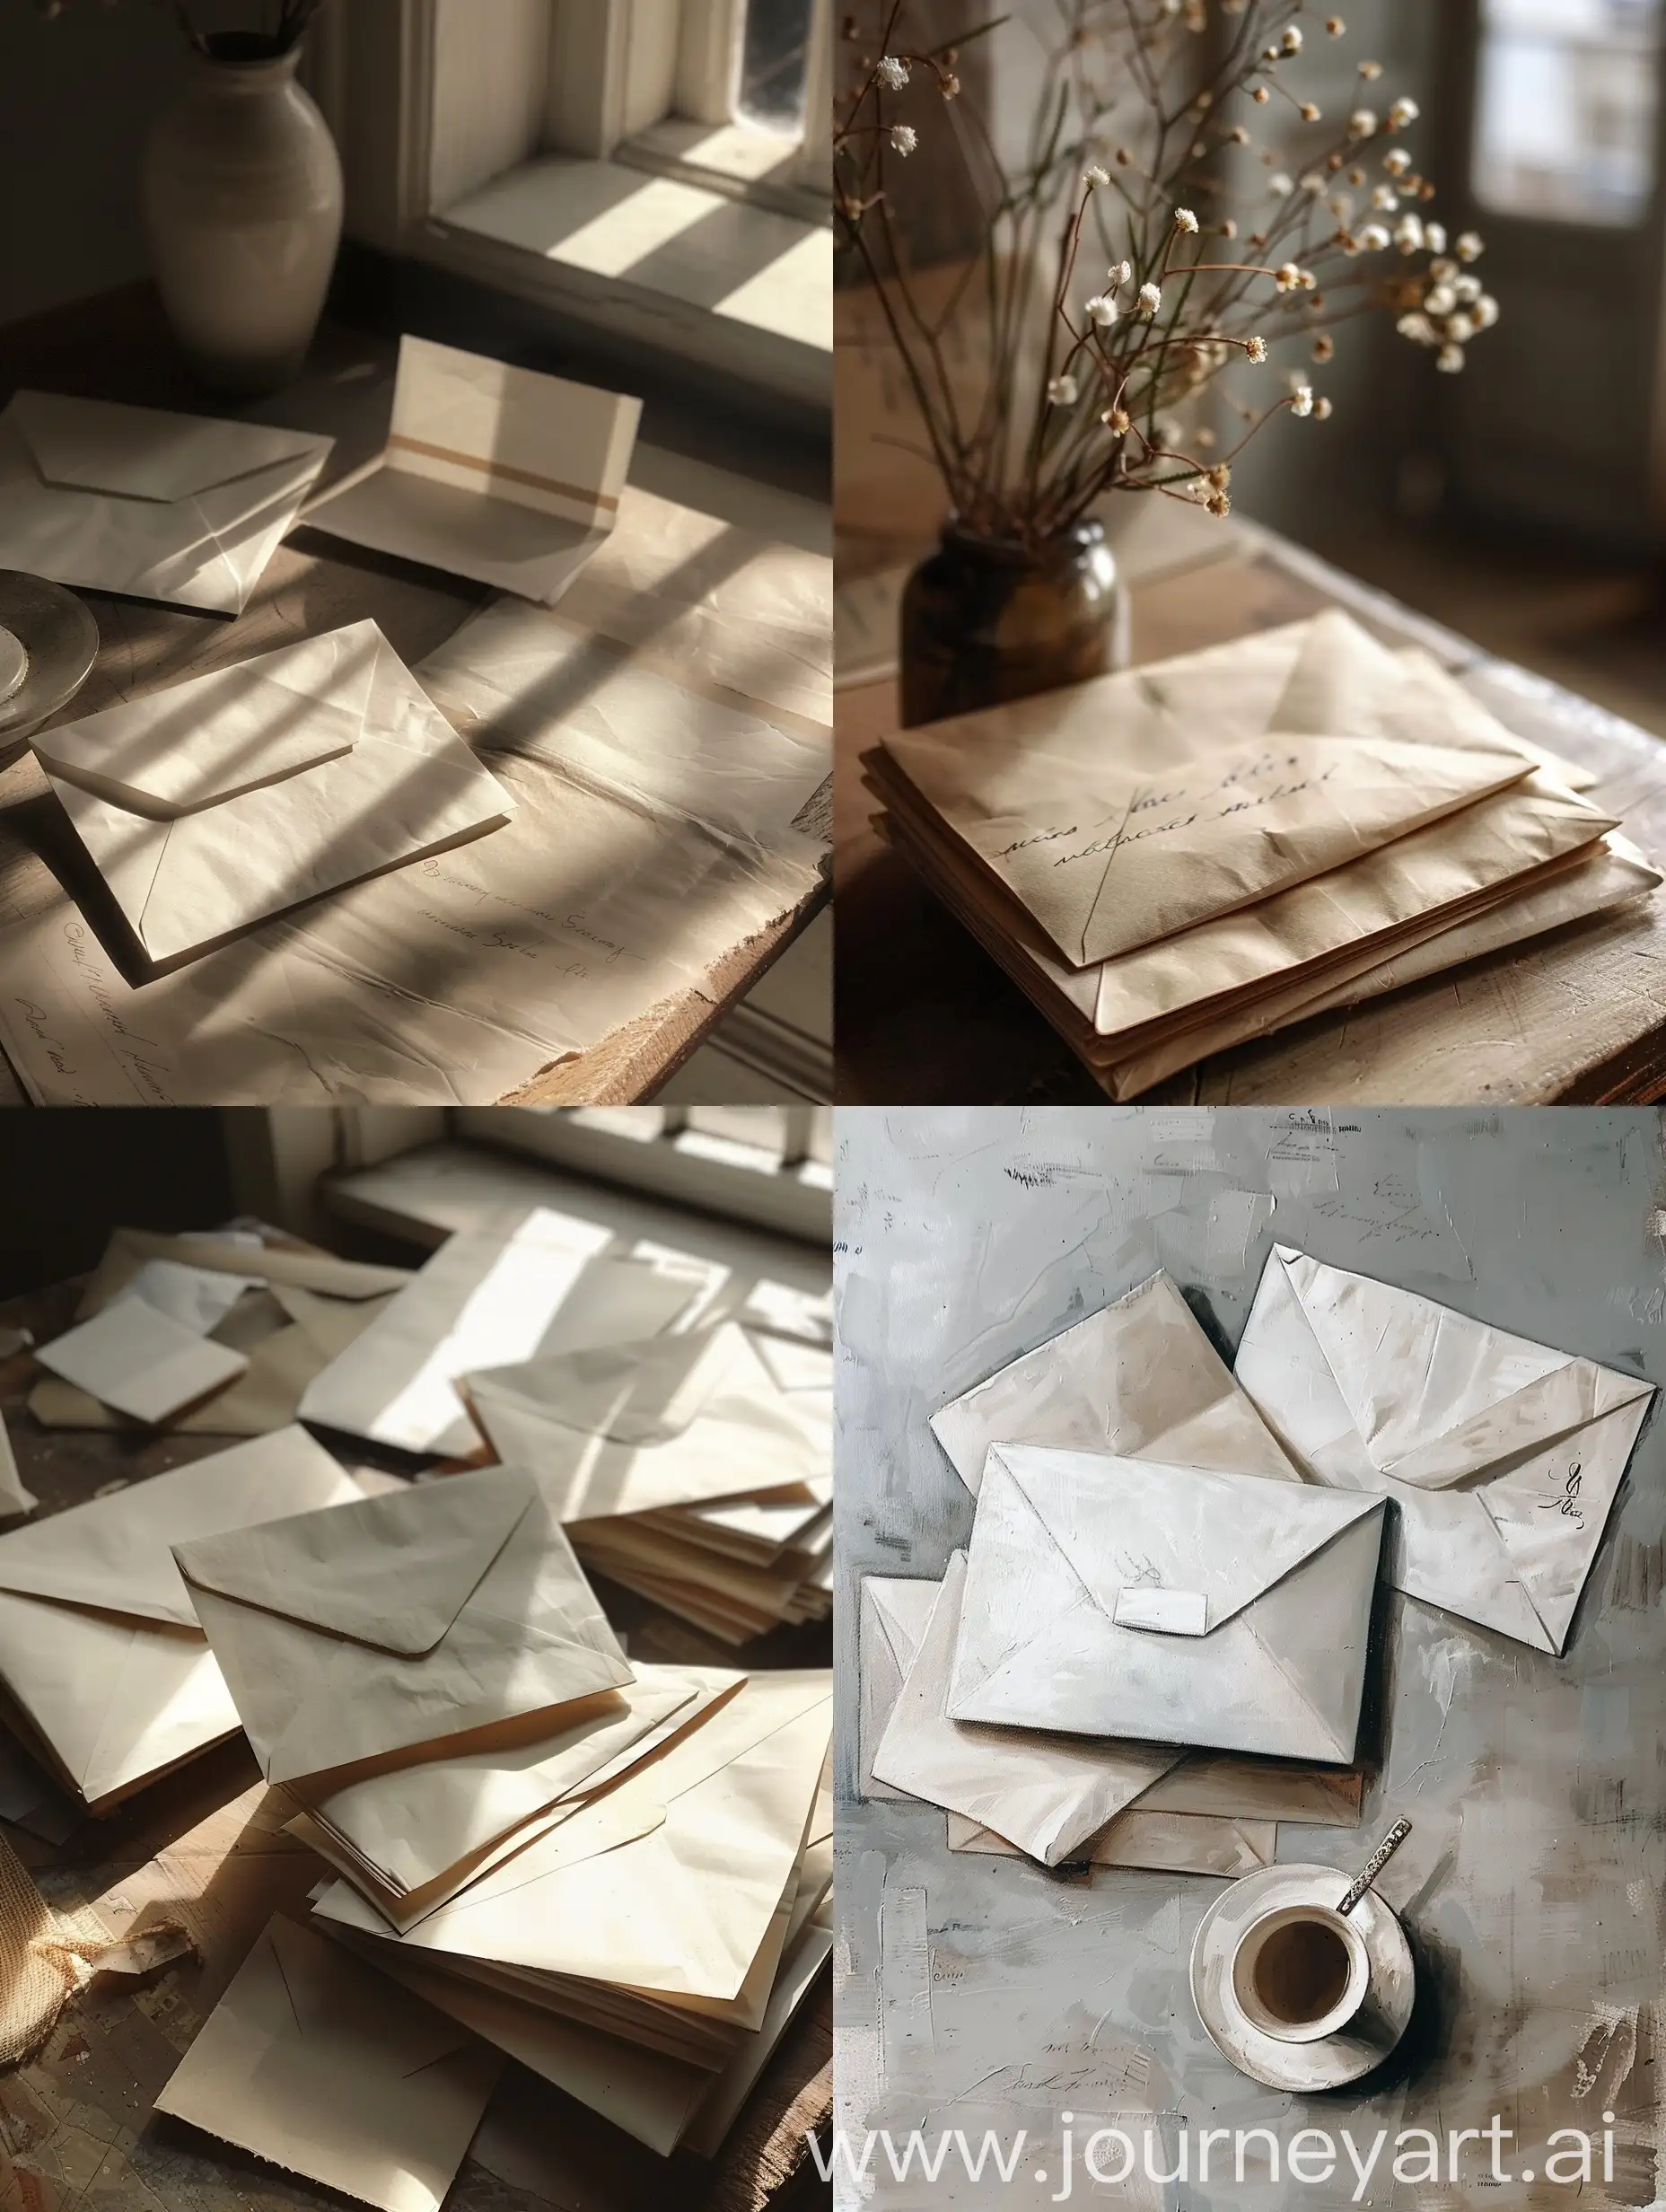 Artistic-Envelopes-Arranged-on-Table-Aesthetic-Display-of-Beauty